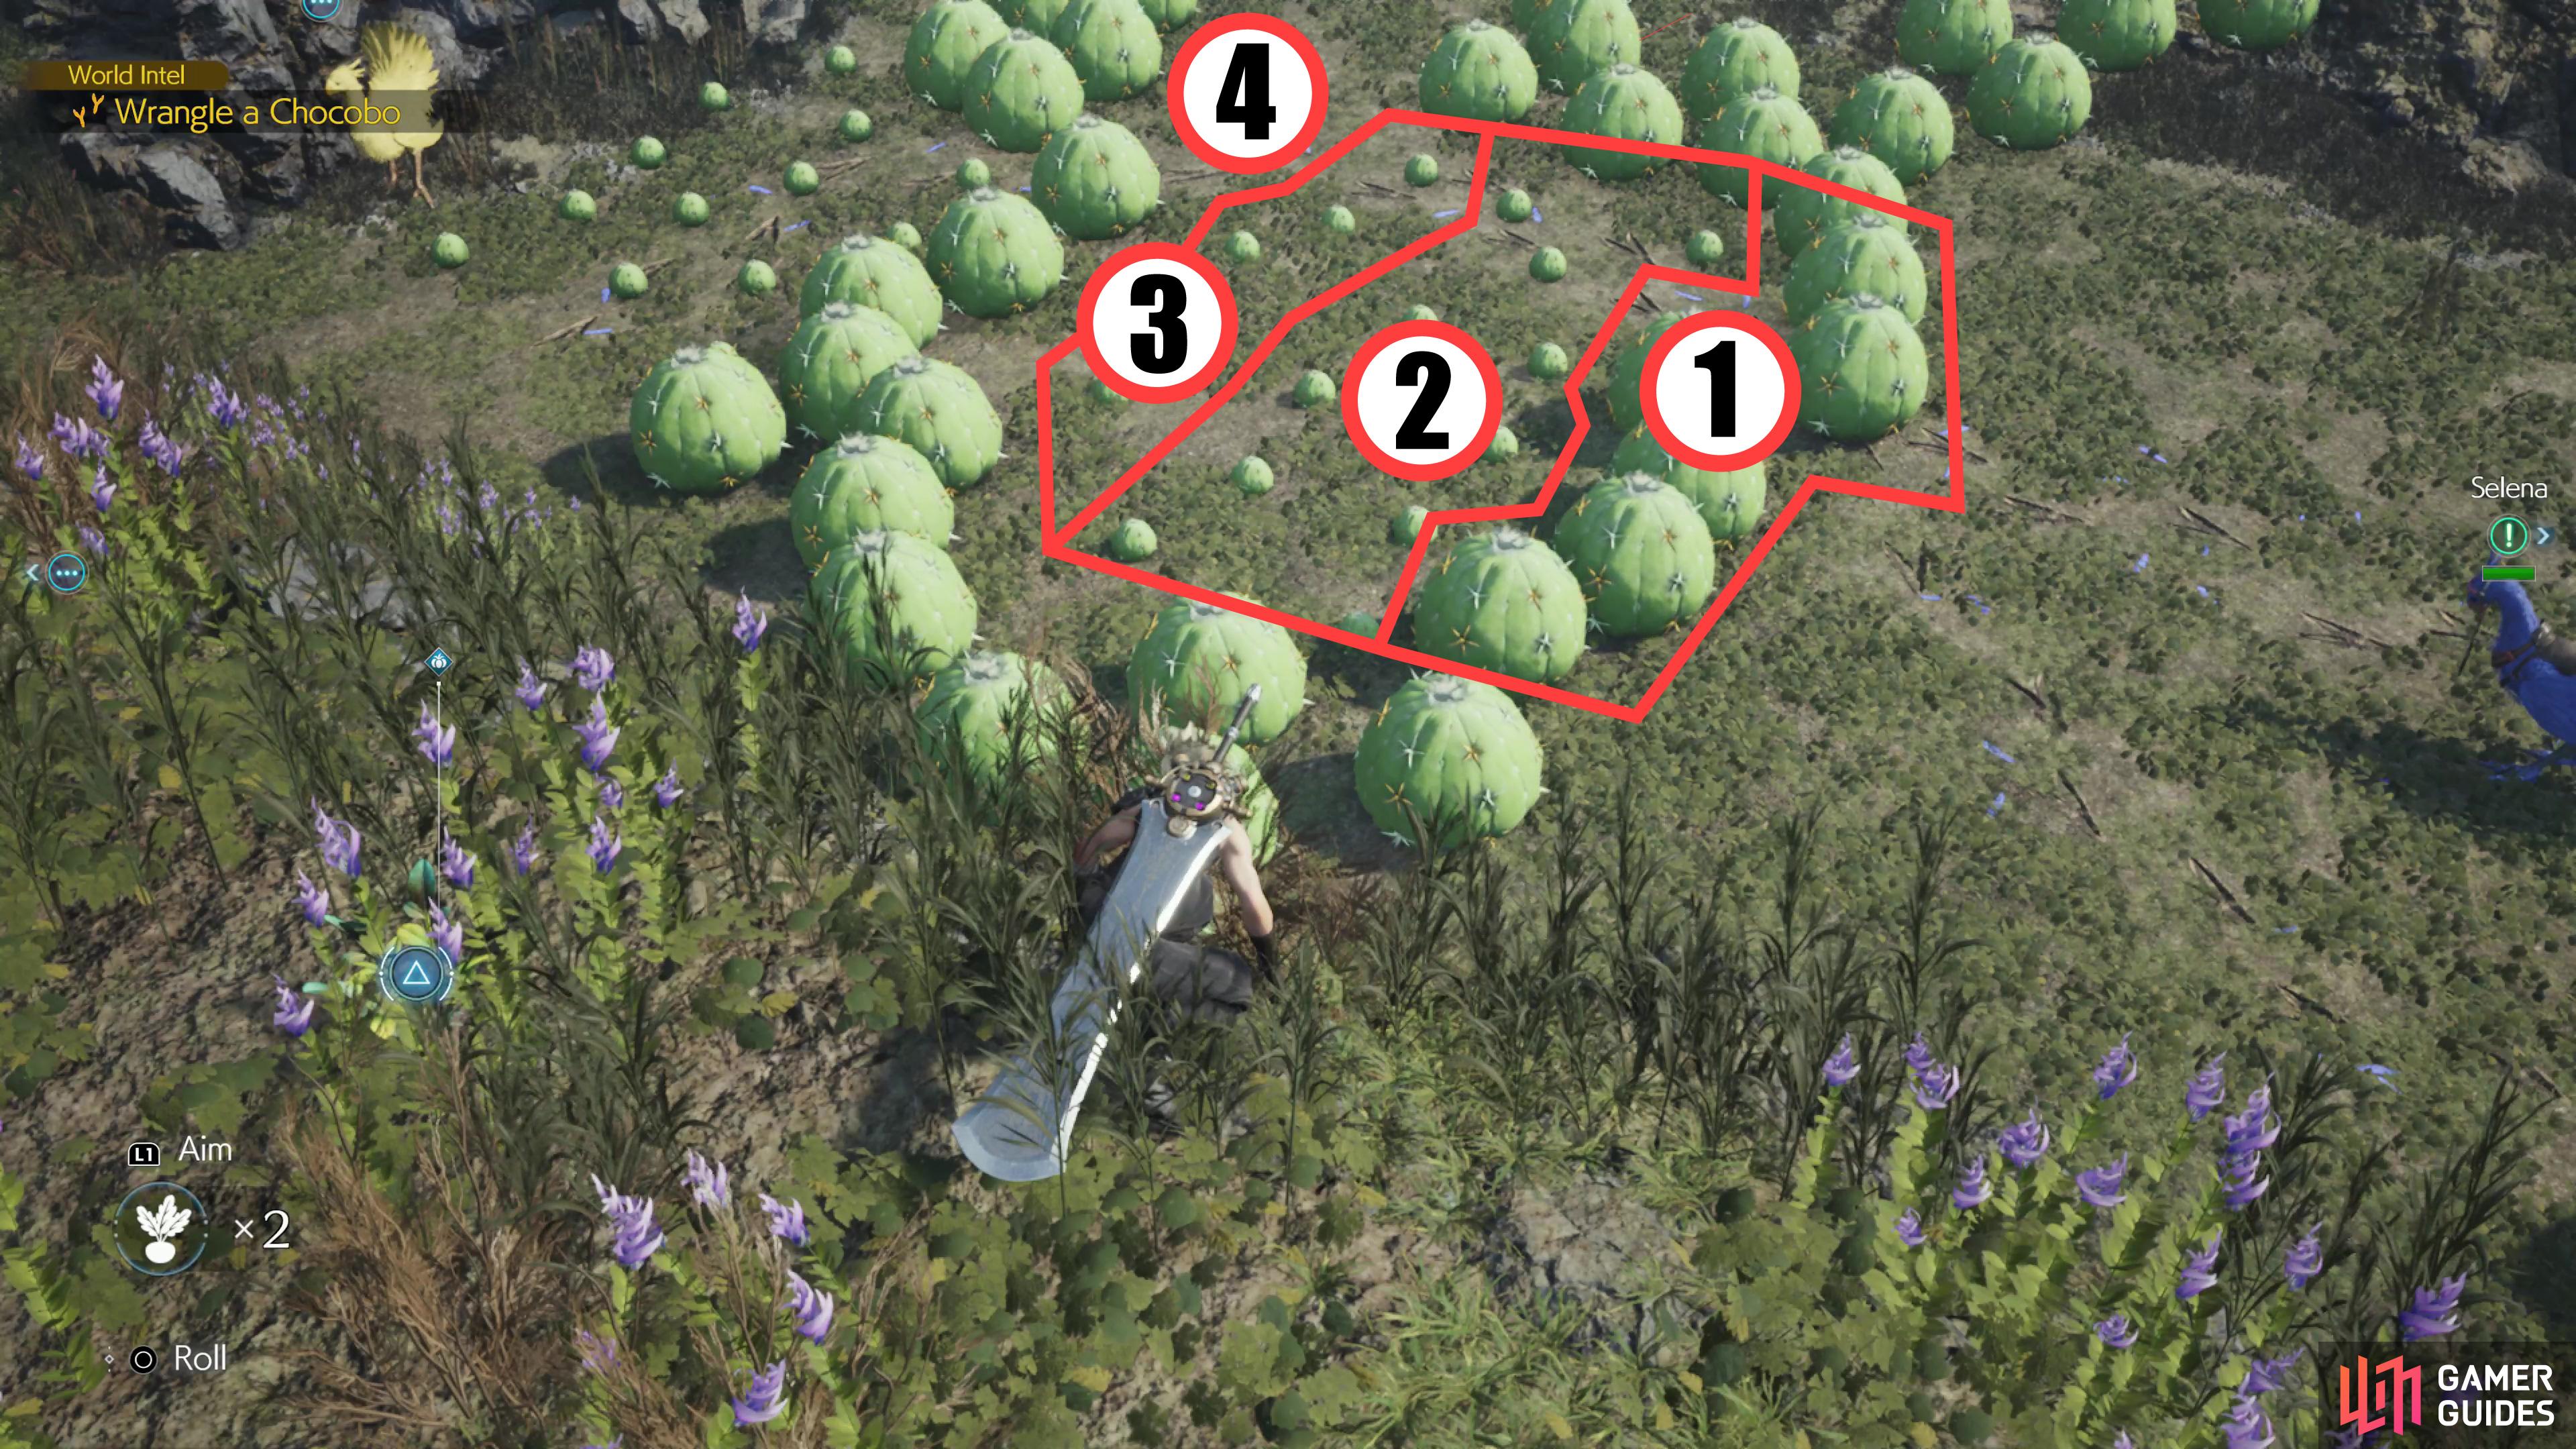 A map of the third cacti puzzle. The cacti in groups #1, #2, and #3 all inflate and deflate together, with #1 deflating first, then #2, and so on. #4 is the barren patch where you need to lure Selena.